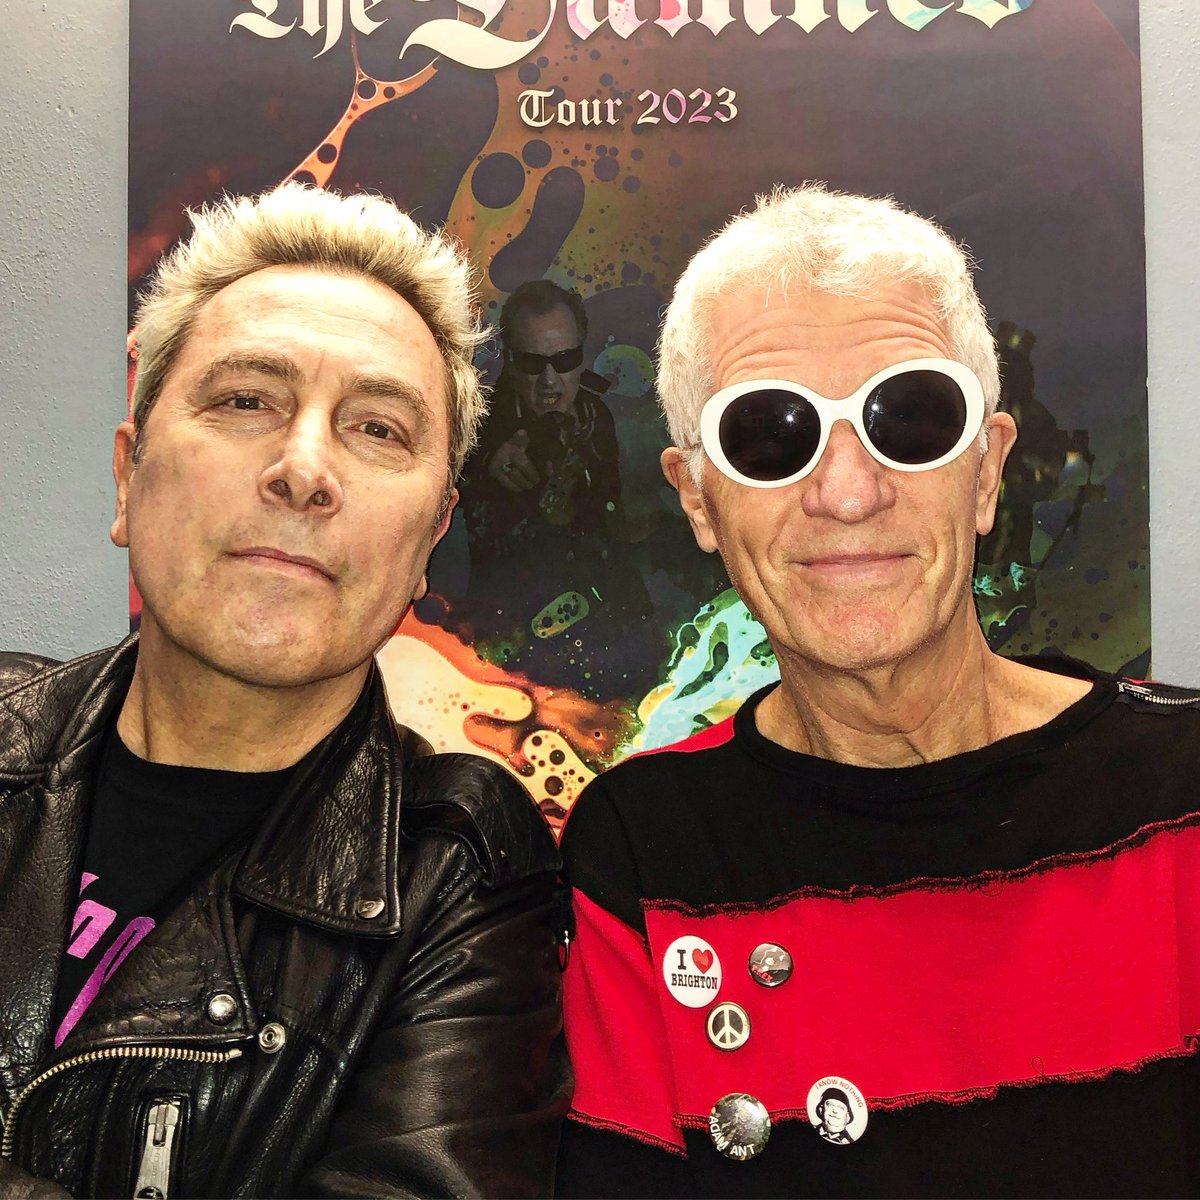 Happy birthday @CaptainSensible punkrocker and legend of @thedamned Oggi a #Revolver su @VirginRadioIT spazio anche a @TheWho @thecure @simplemindscom @DavidBowieReal @talkingheads @TheDoors @tompetty @Badfinger_Offcl Volume criminale per @RevolverShow #onair #diretta…